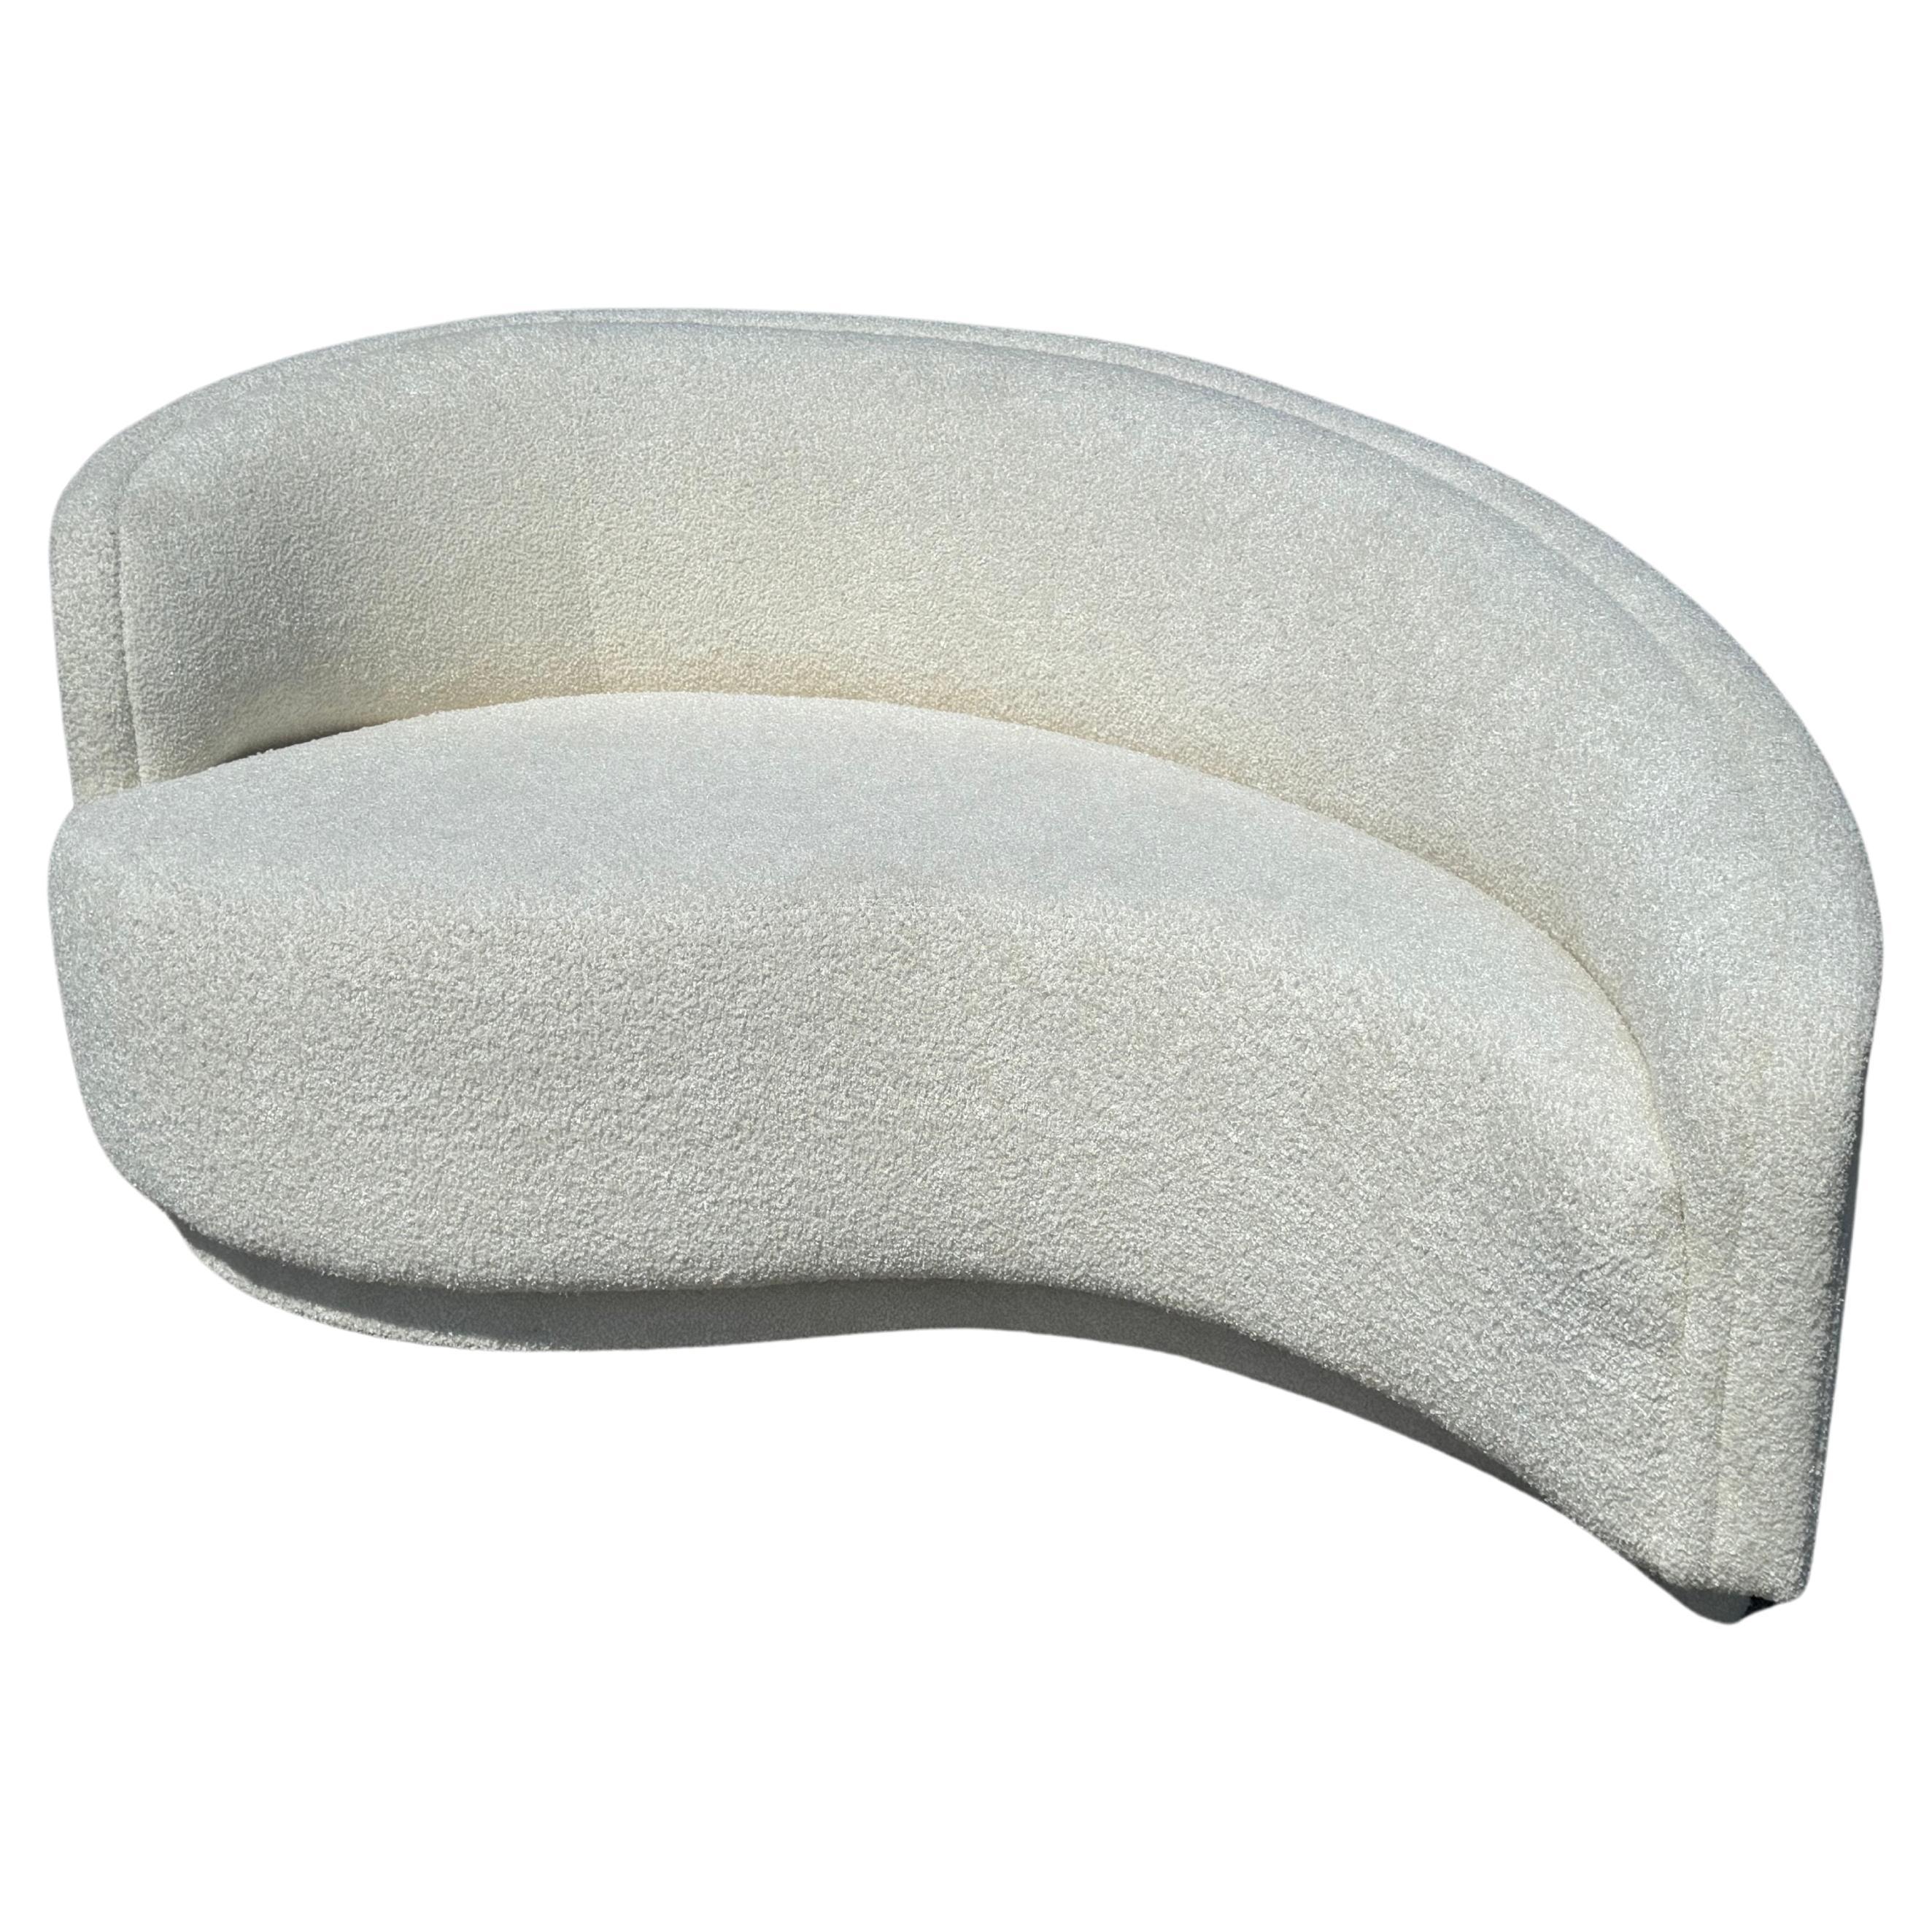 1980s Glamours Curved Sofa - Chaise by Vladimir Kagan for Weiman in White Bouclé For Sale 7